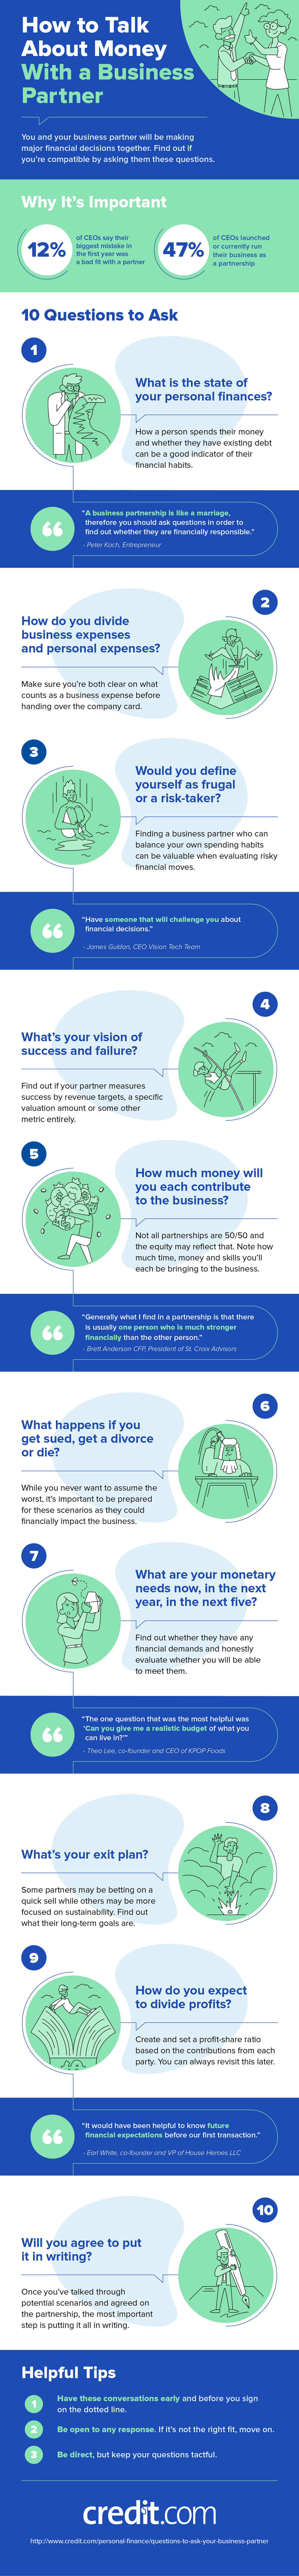 financial-questions-to-ask-your-business-partner-infographic-noresize